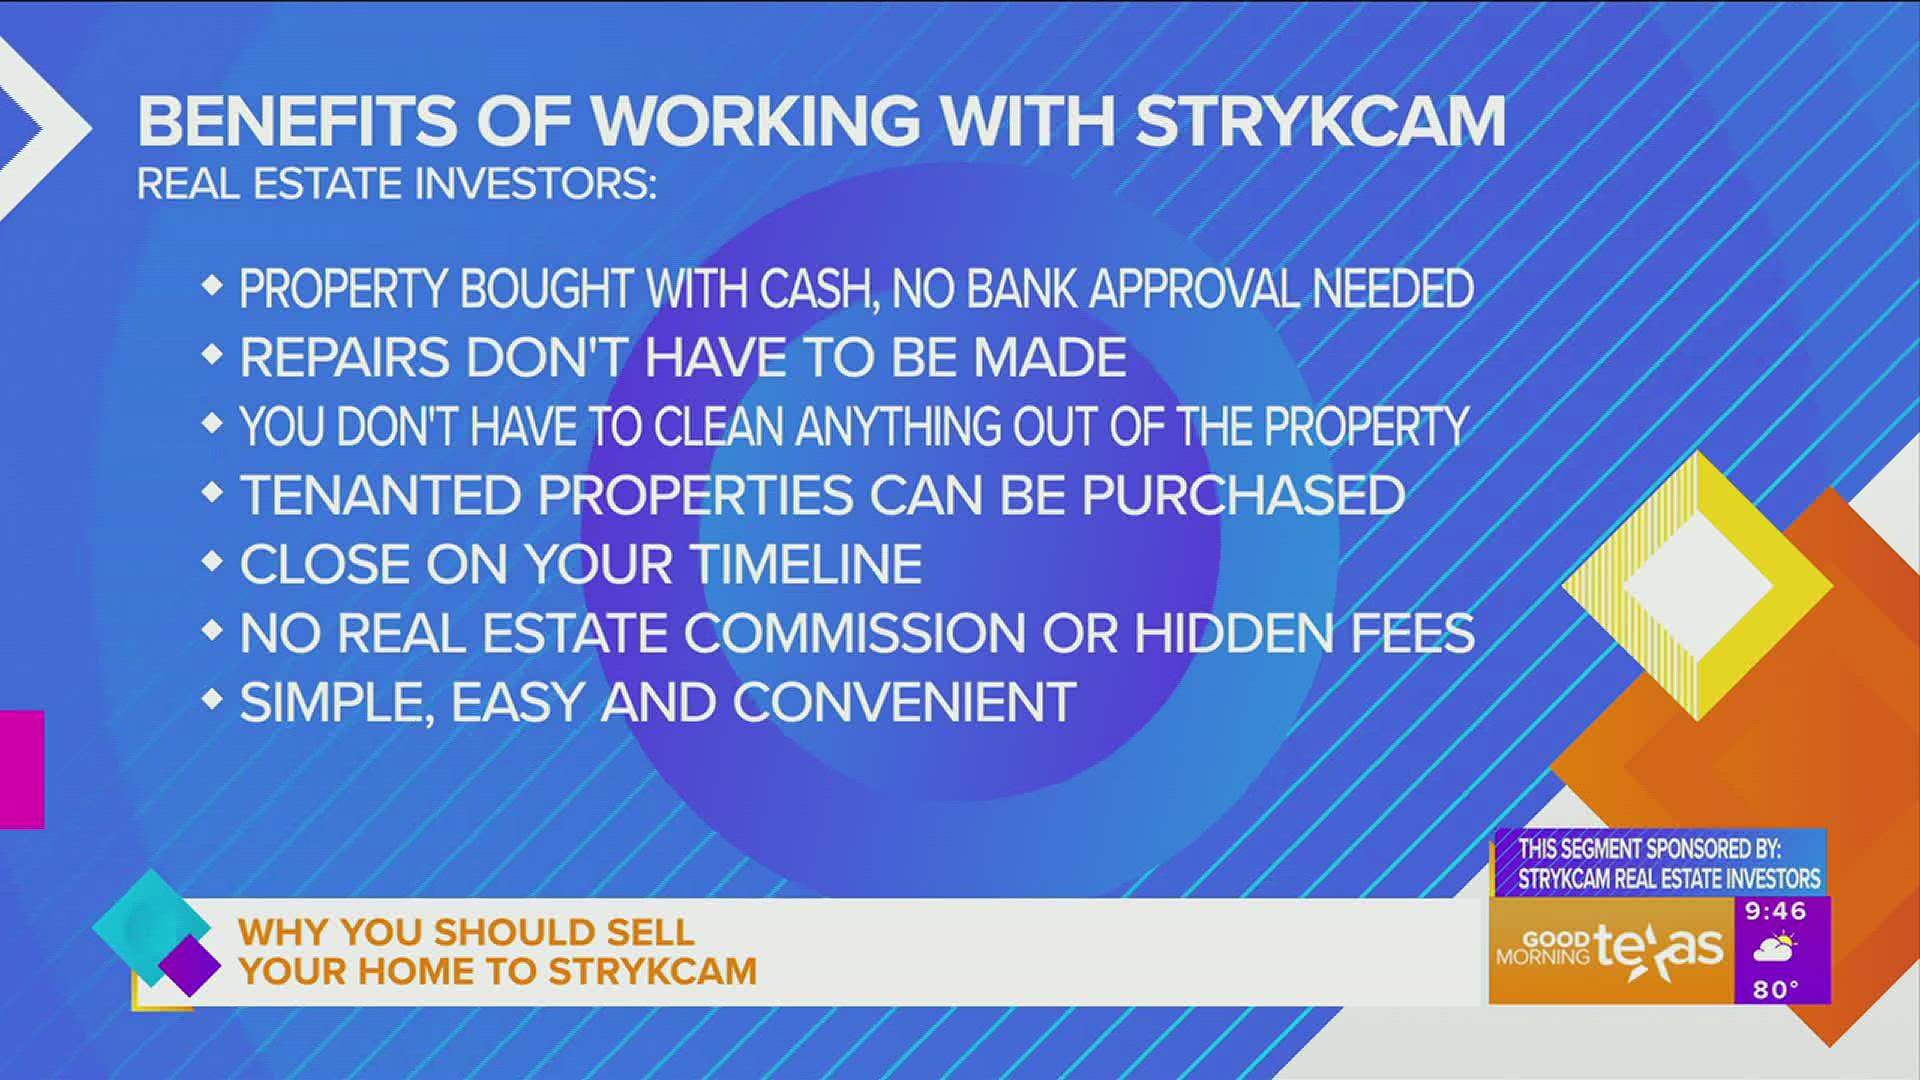 This segment is sponsored by StrykCam Real Estate Investors.